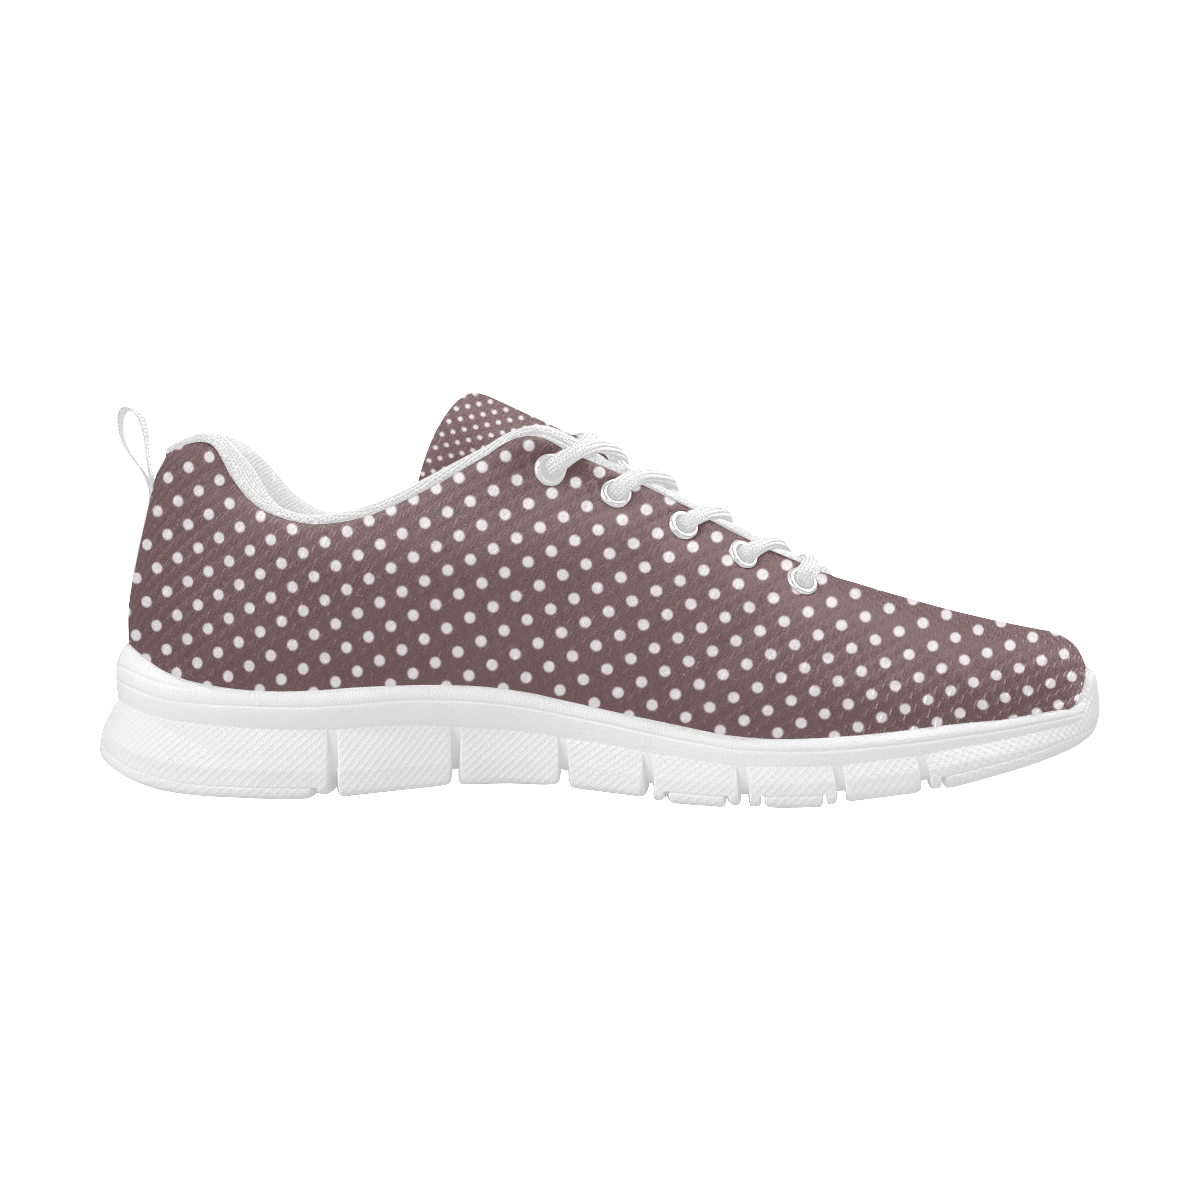 Chocolate brown polka dots Women's Breathable Running Shoes/Large (Model 055)